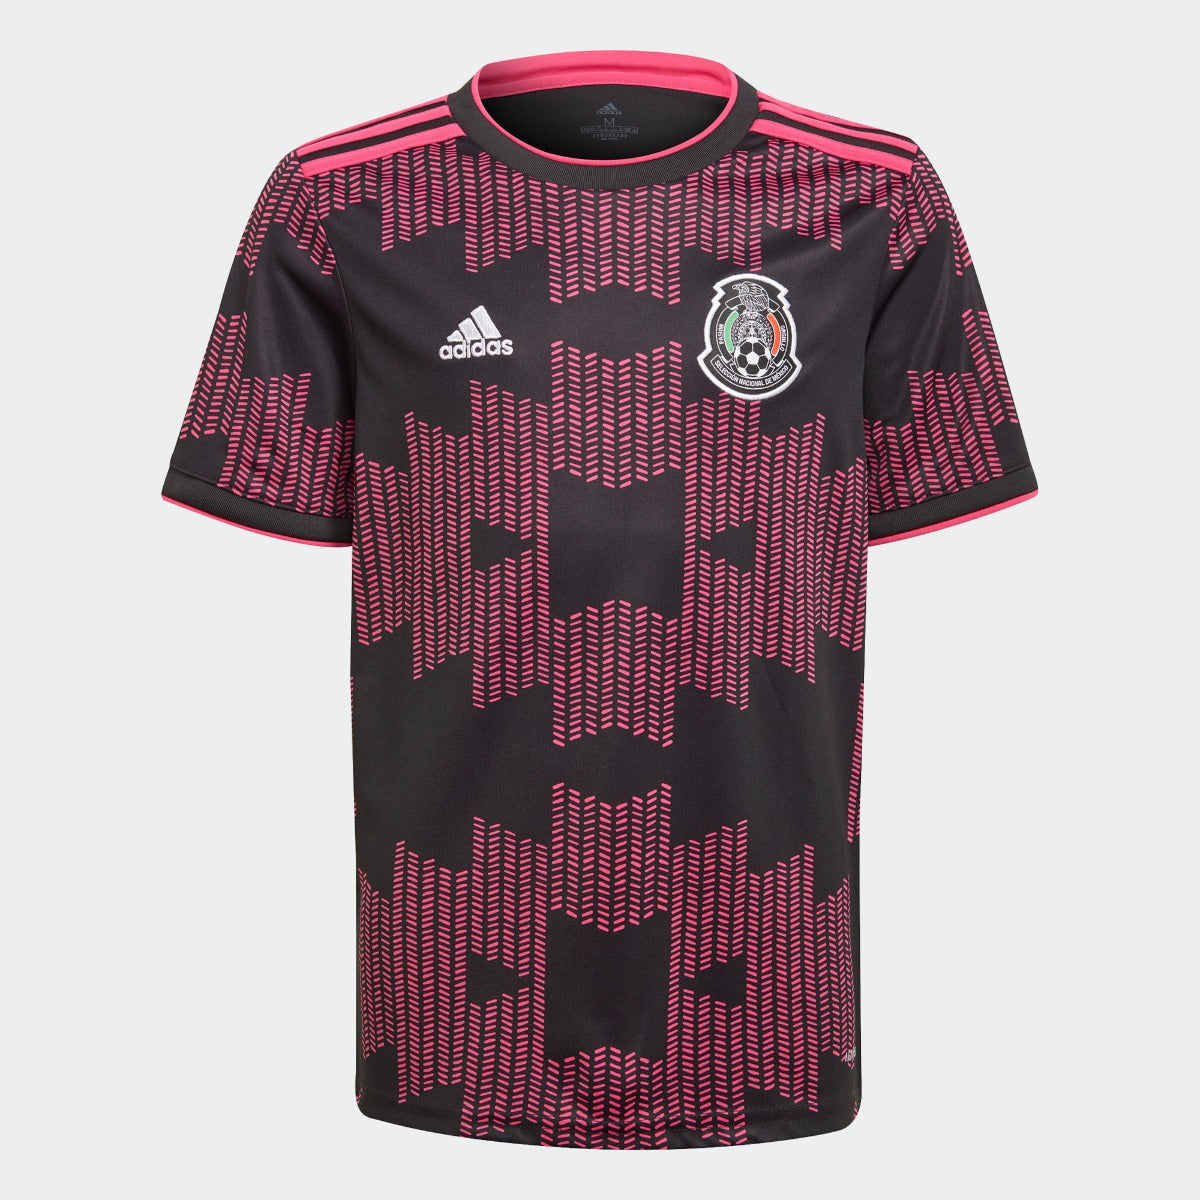 Adidas 2021-22 Mexico Youth Home Jersey - Black-Real Magenta (Front)